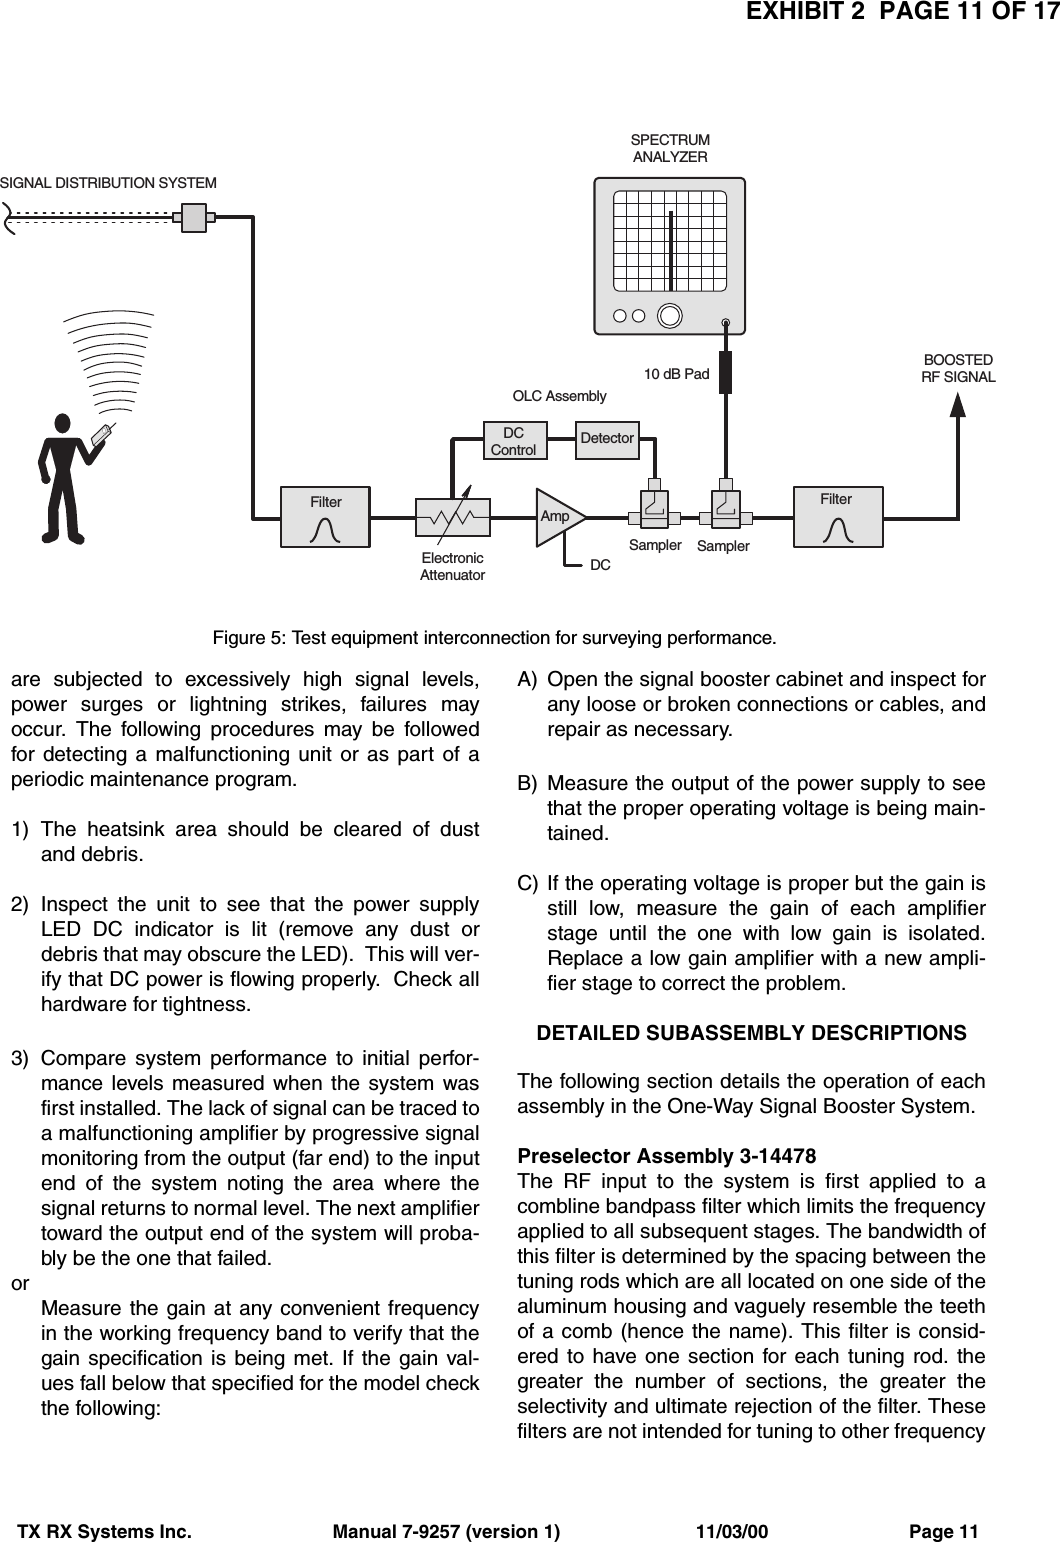 EXHIBIT 2  PAGE 11 OF 17TX RX Systems Inc.                           Manual 7-9257 (version 1)                          11/03/00                           Page 11are subjected to excessively high signal levels,power surges or lightning strikes, failures mayoccur. The following procedures may be followedfor detecting a malfunctioning unit or as part of aperiodic maintenance program.1) The heatsink area should be cleared of dustand debris.2) Inspect the unit to see that the power supplyLED DC indicator is lit (remove any dust ordebris that may obscure the LED).  This will ver-ify that DC power is flowing properly.  Check allhardware for tightness.3) Compare system performance to initial perfor-mance levels measured when the system wasfirst installed. The lack of signal can be traced toa malfunctioning amplifier by progressive signalmonitoring from the output (far end) to the inputend of the system noting the area where thesignal returns to normal level. The next amplifiertoward the output end of the system will proba-bly be the one that failed.orMeasure the gain at any convenient frequencyin the working frequency band to verify that thegain specification is being met. If the gain val-ues fall below that specified for the model checkthe following:A) Open the signal booster cabinet and inspect forany loose or broken connections or cables, andrepair as necessary.B) Measure the output of the power supply to seethat the proper operating voltage is being main-tained.C) If the operating voltage is proper but the gain isstill low, measure the gain of each amplifierstage until the one with low gain is isolated.Replace a low gain amplifier with a new ampli-fier stage to correct the problem.DETAILED SUBASSEMBLY DESCRIPTIONSThe following section details the operation of eachassembly in the One-Way Signal Booster System.Preselector Assembly 3-14478The RF input to the system is first applied to acombline bandpass filter which limits the frequencyapplied to all subsequent stages. The bandwidth ofthis filter is determined by the spacing between thetuning rods which are all located on one side of thealuminum housing and vaguely resemble the teethof a comb (hence the name). This filter is consid-ered to have one section for each tuning rod. thegreater the number of sections, the greater theselectivity and ultimate rejection of the filter. Thesefilters are not intended for tuning to other frequencyDCSampler SamplerDetectorElectronicAttenuatorOLC AssemblyFilter FilterAmpDCControl10 dB PadSPECTRUMANALYZERSIGNAL DISTRIBUTION SYSTEMBOOSTEDRF SIGNALFigure 5: Test equipment interconnection for surveying performance.